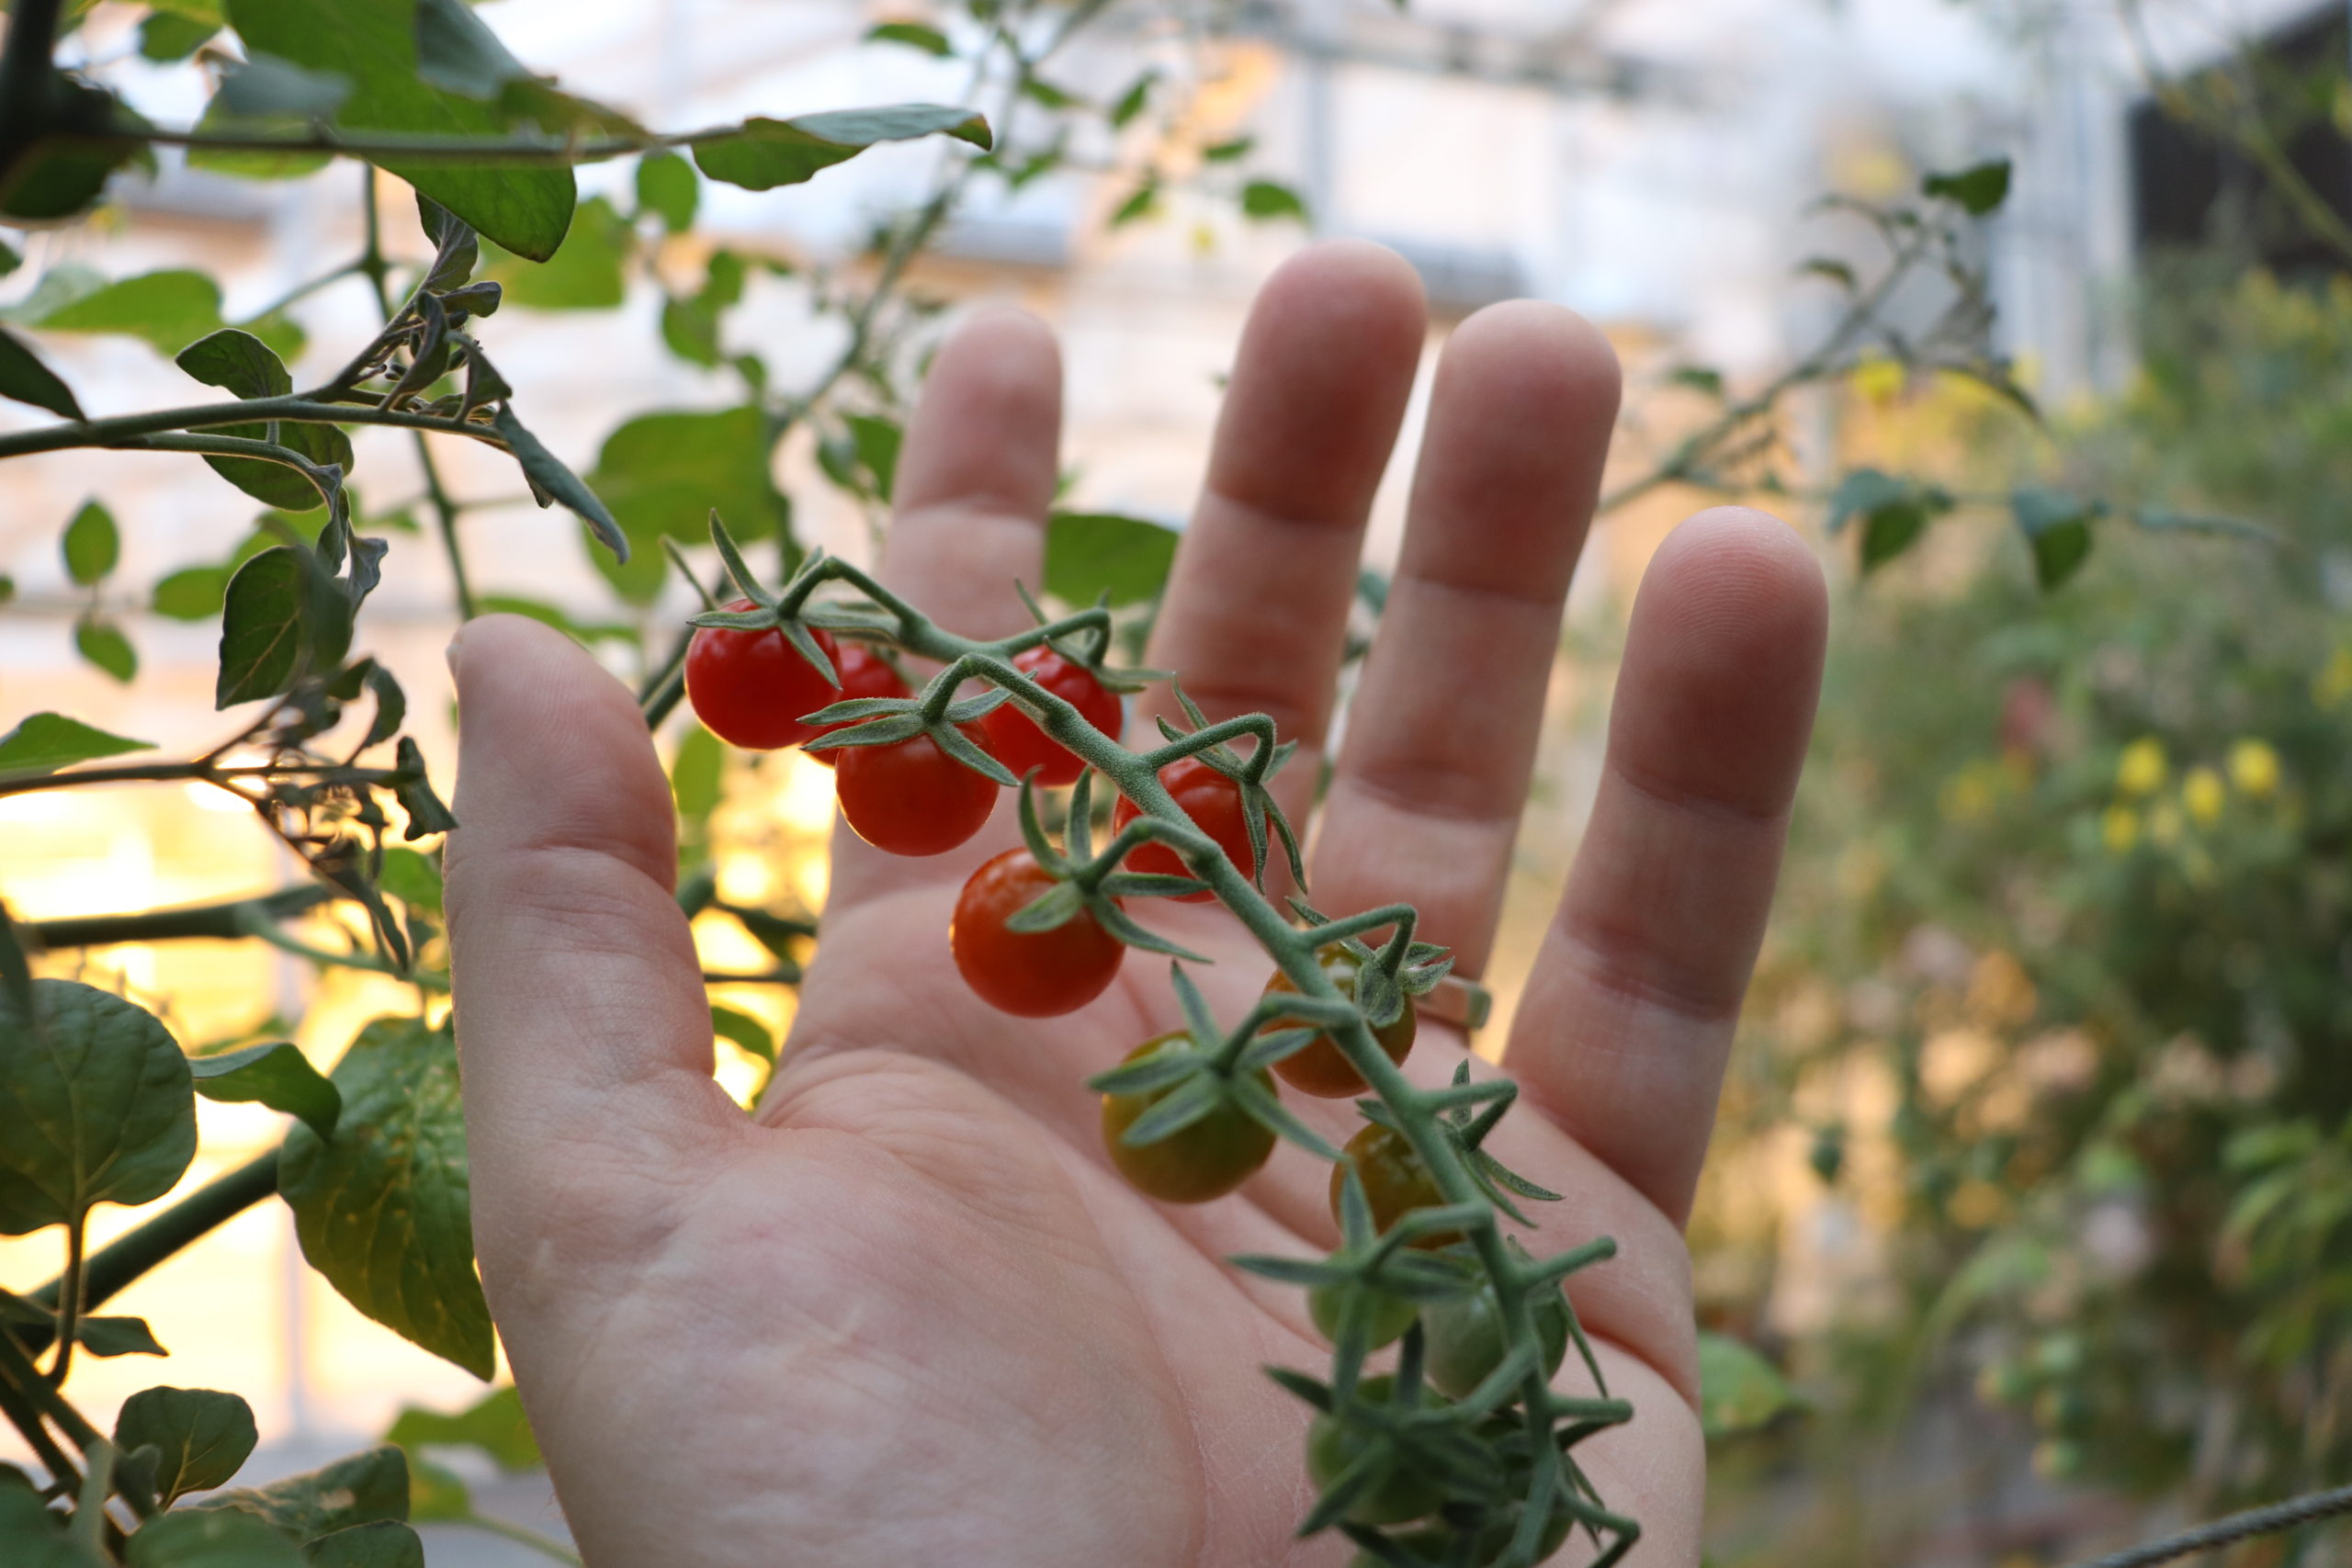 A closeup photo of a branch of Solanum pimpinellifolium fruits in a hand. The fruits are still on the plant, and are all in a row, about 14 of them. The fruit closest to the plant are bright red, and they gradually turn green as you get farther from the plant towards the end of the branch. The fruits look like tiny tomatoes, about the size of blueberries.